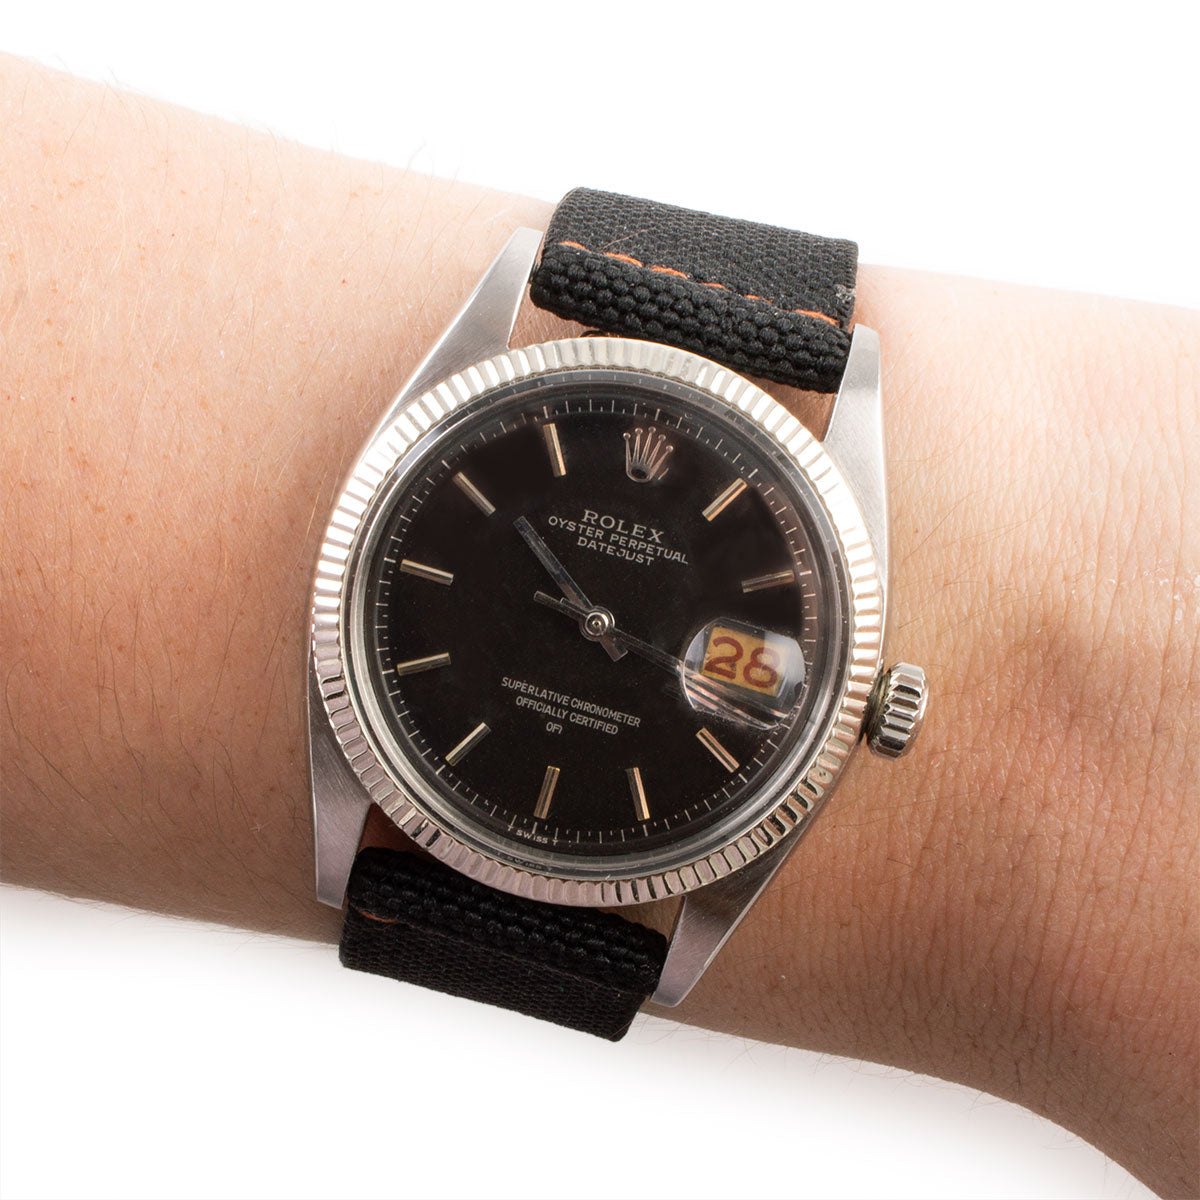 Second-hand watch - Rolex - Oyster Perpetual Datejust - 4800€